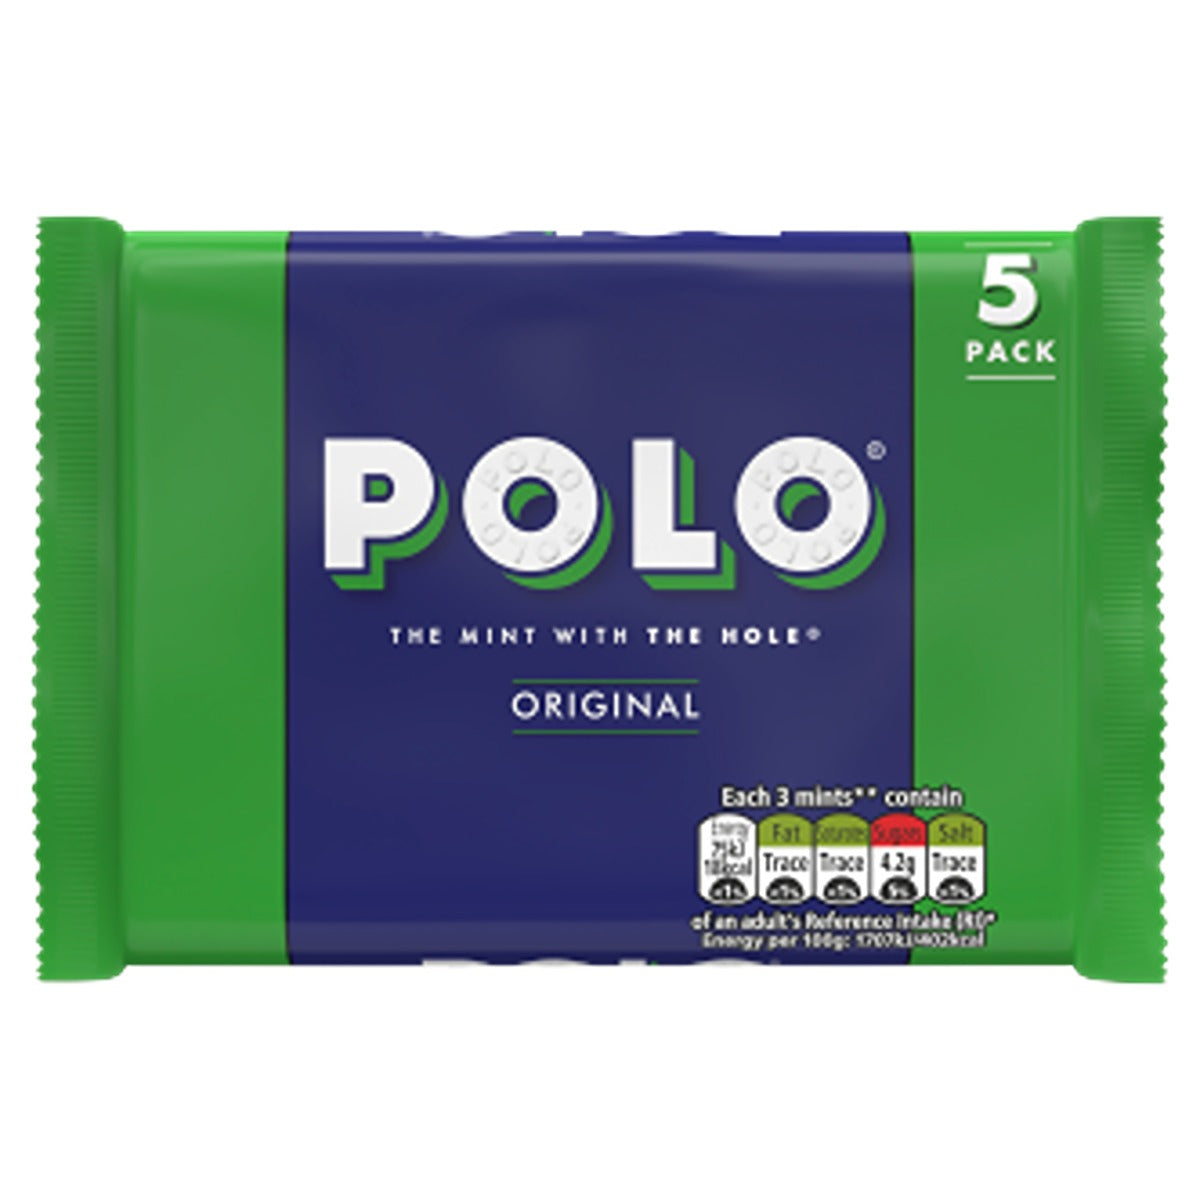 Polo - Original Mint Tube Multipack - 25g x 5 Packs - Continental Food Store